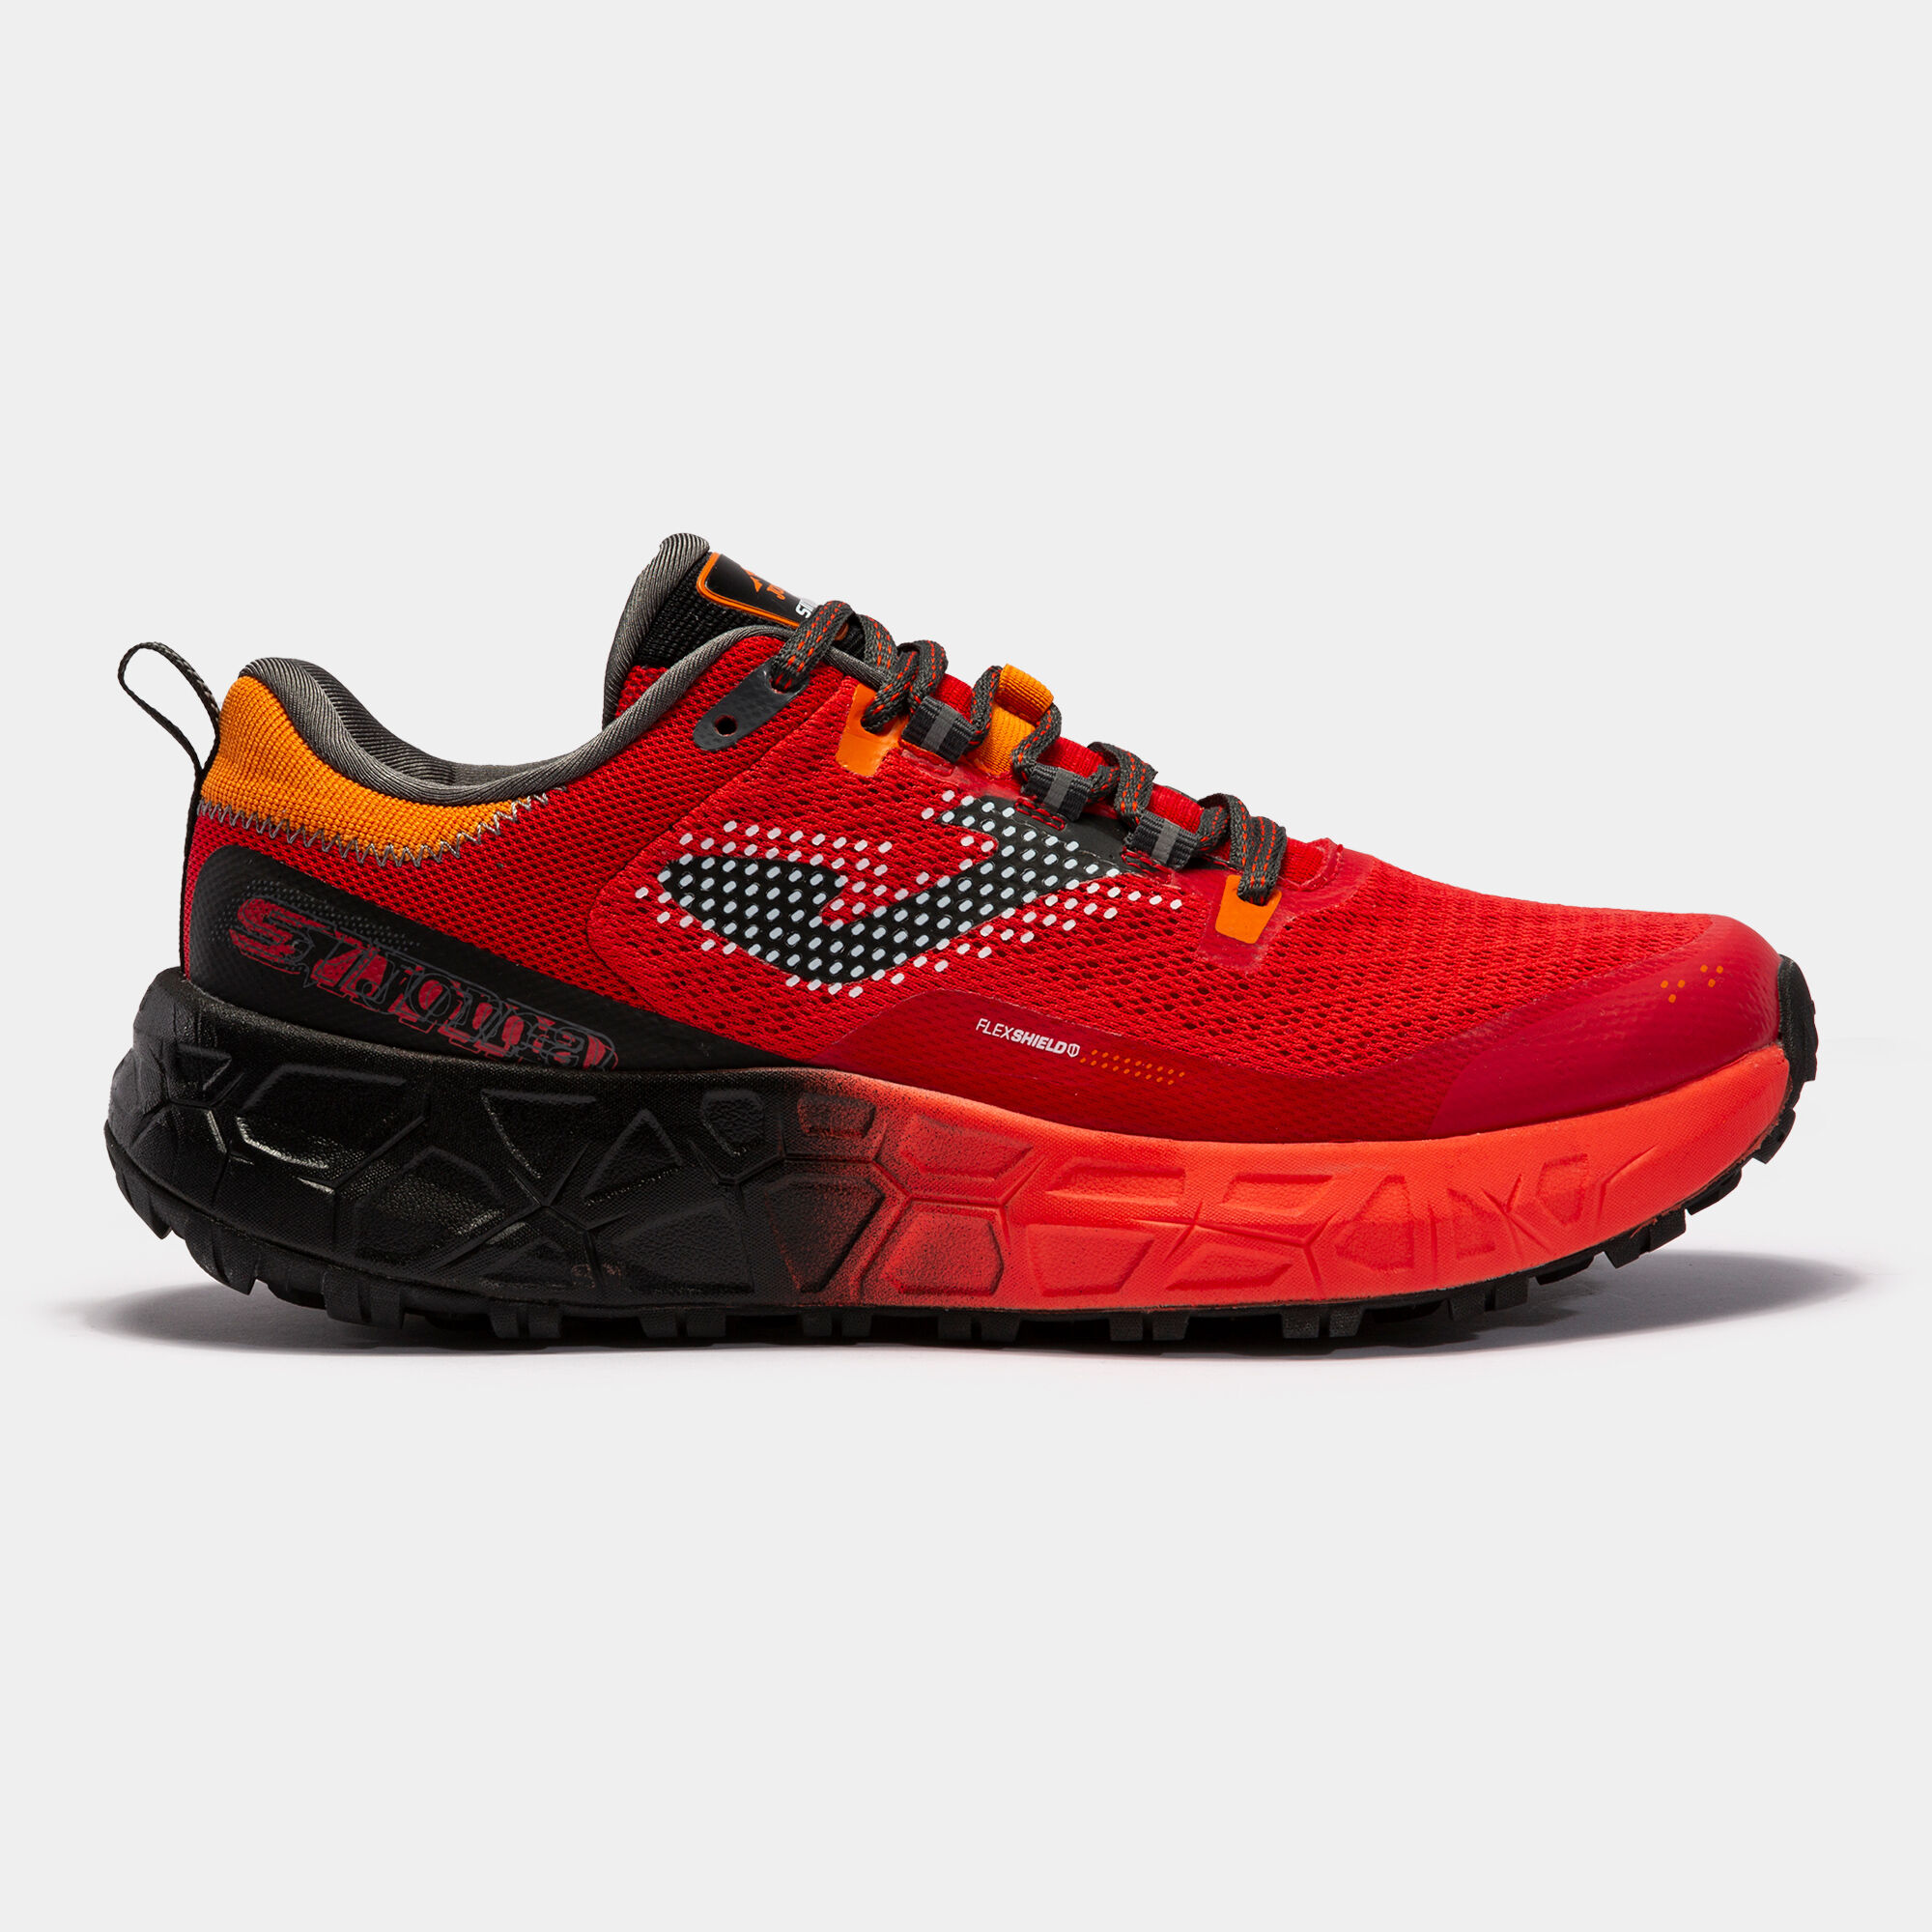 CHAUSSURES TRAIL RUNNING SIMA 22 HOMME ROUGE ORANGE